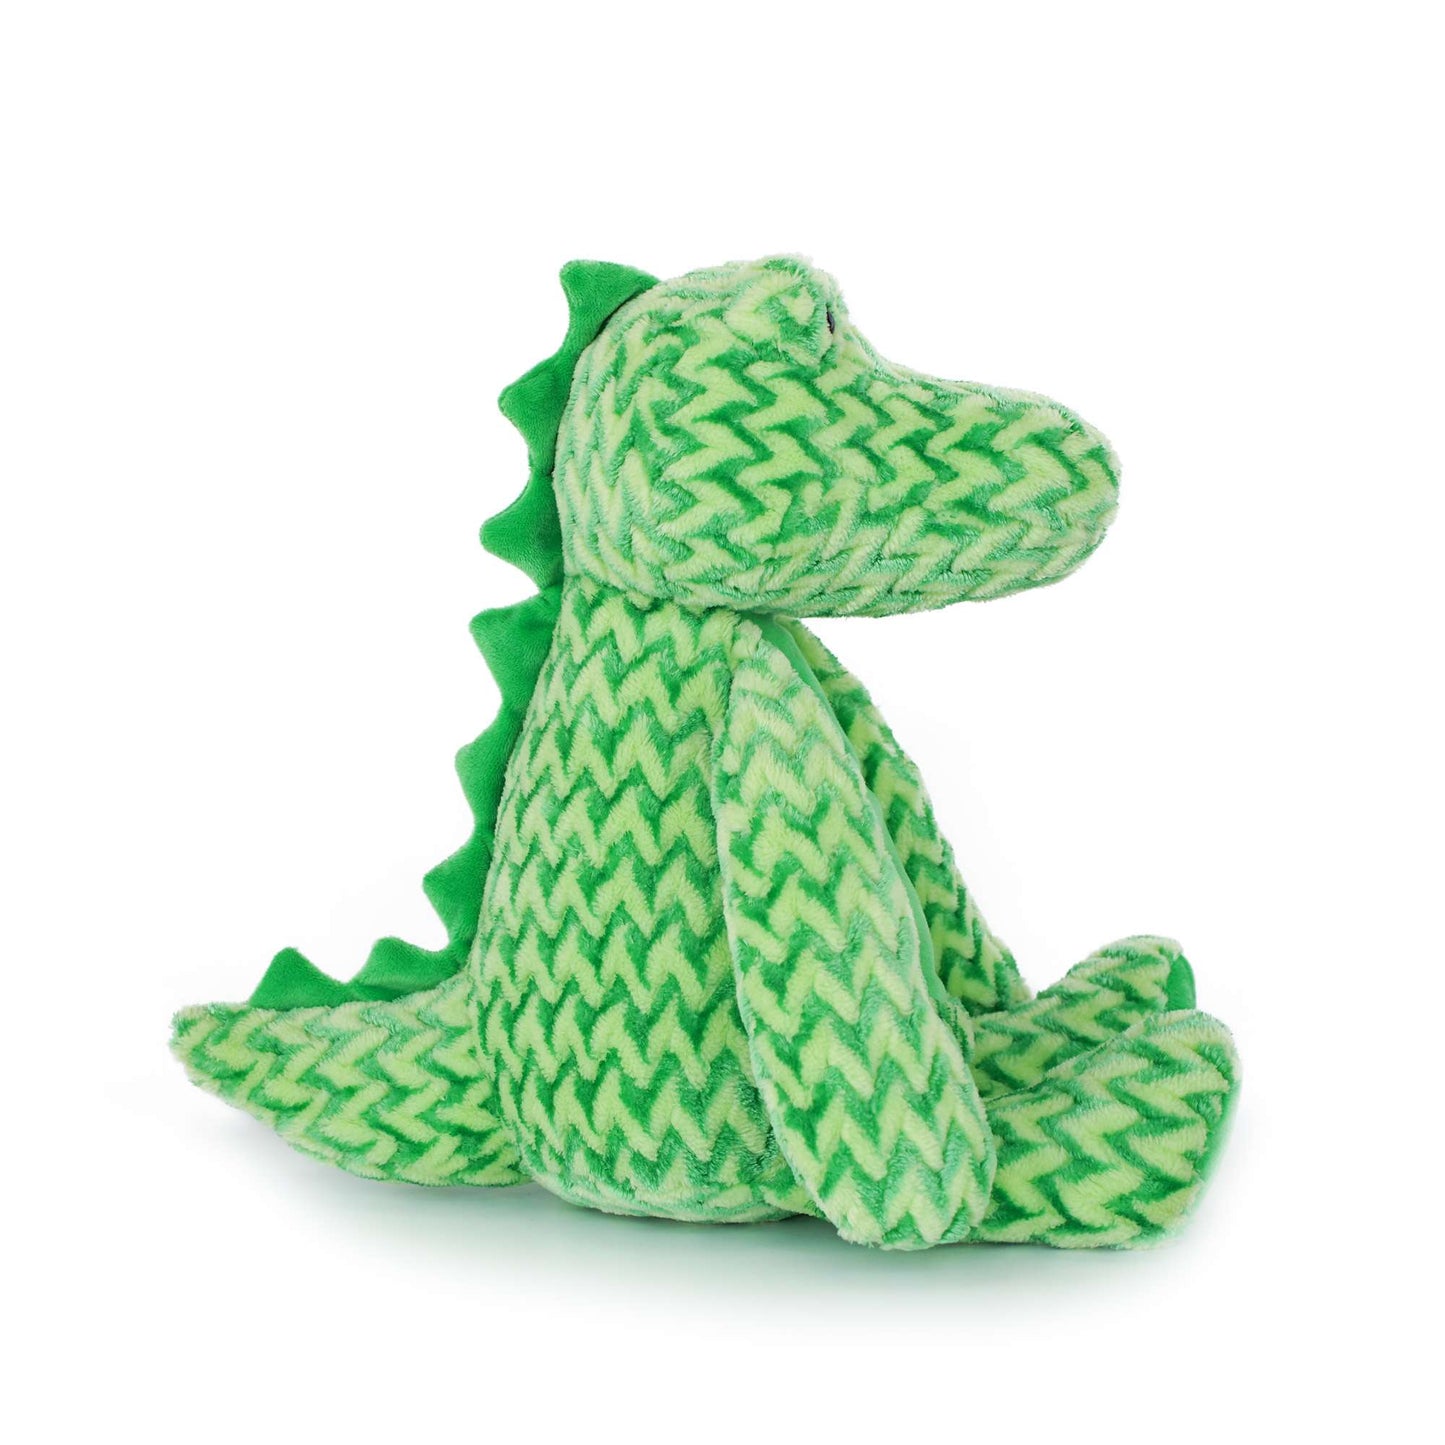 Side view chubby body alligator stuffed animal PlushThis